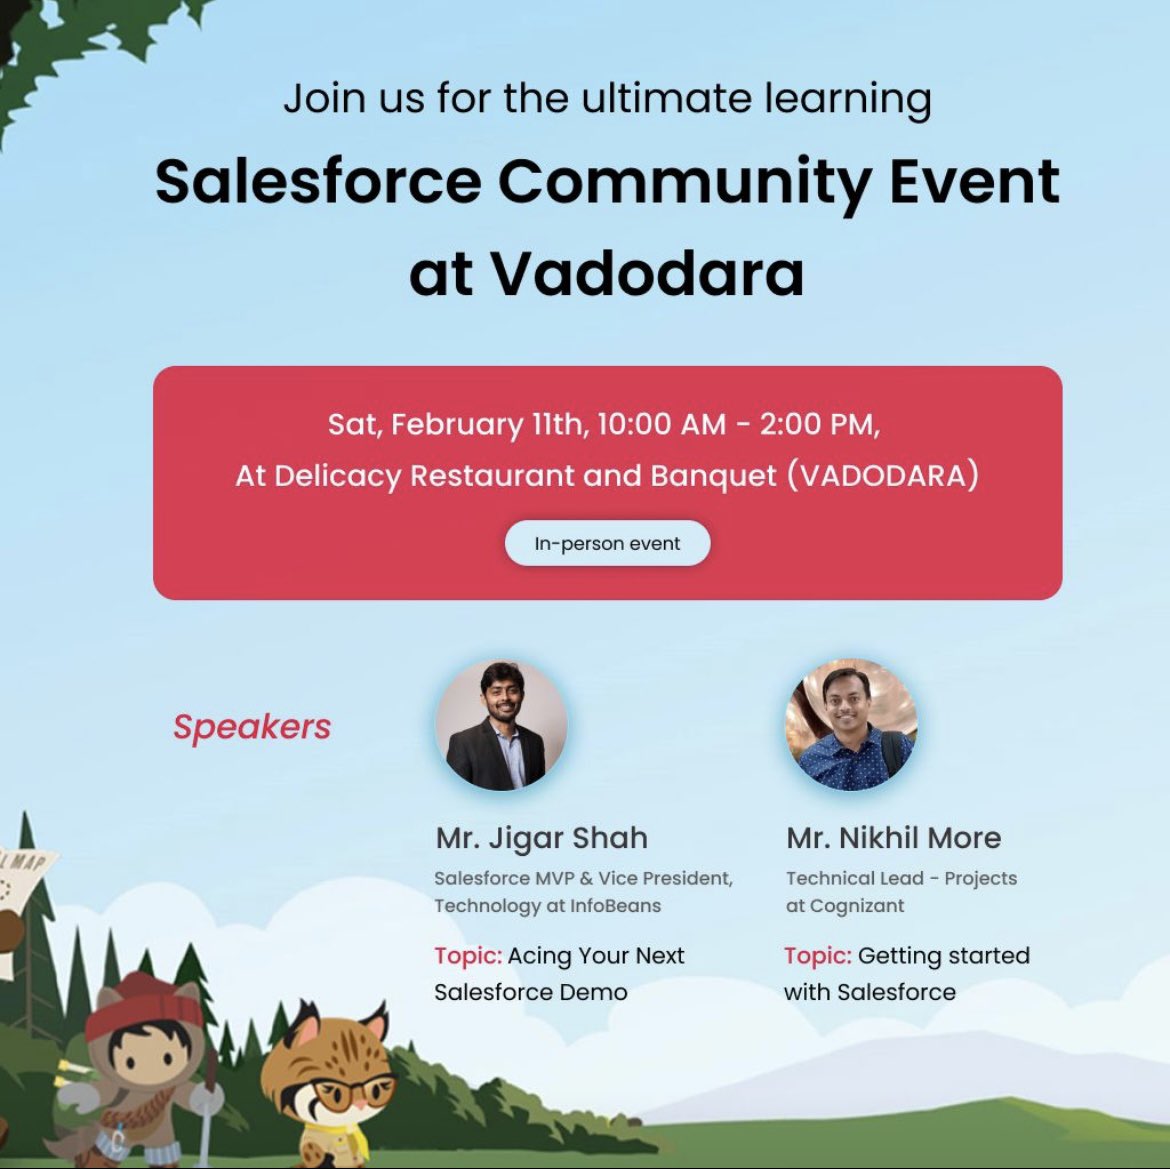 Calling all #Salesforce enthusiasts! 

Highly anticipated #SalesforceCommunity Event, Mark your calendars for February 11 from 10 AM to 2 PM for a true company of like-minded individuals. 

#trailblazercommunity #salesforceohana #salesforceadmin #salesforcedeveloper #vadodara